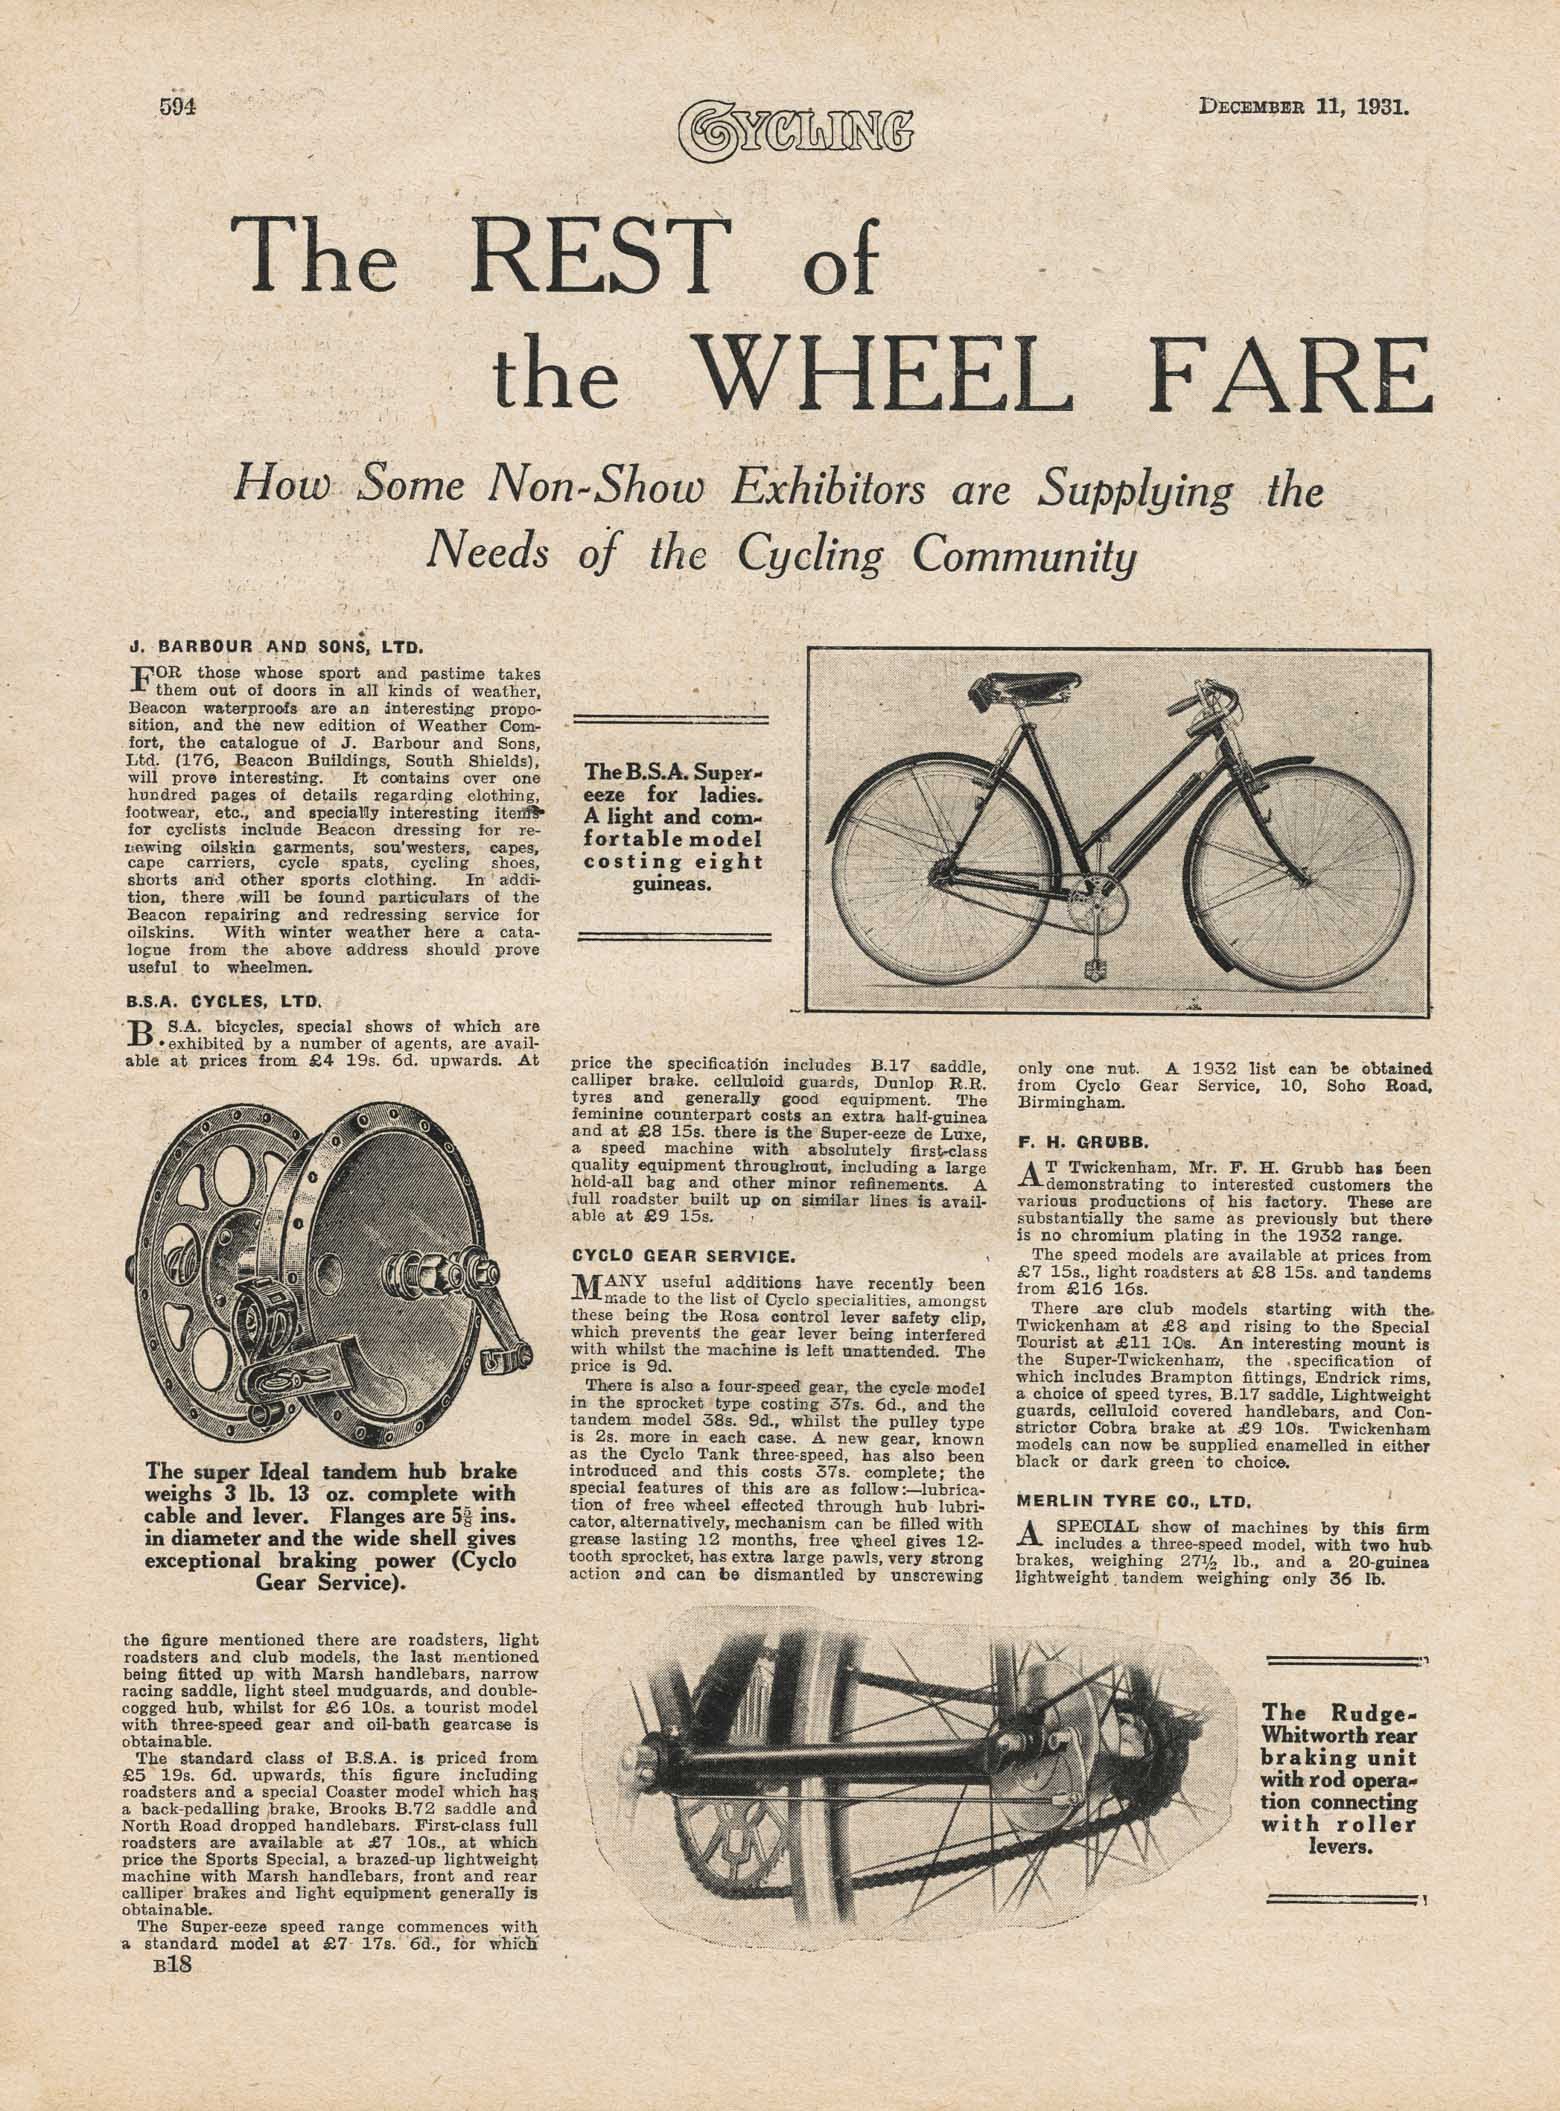 Cycling 1931-12-11 - The Rest of the Wheel Fare 01 main image